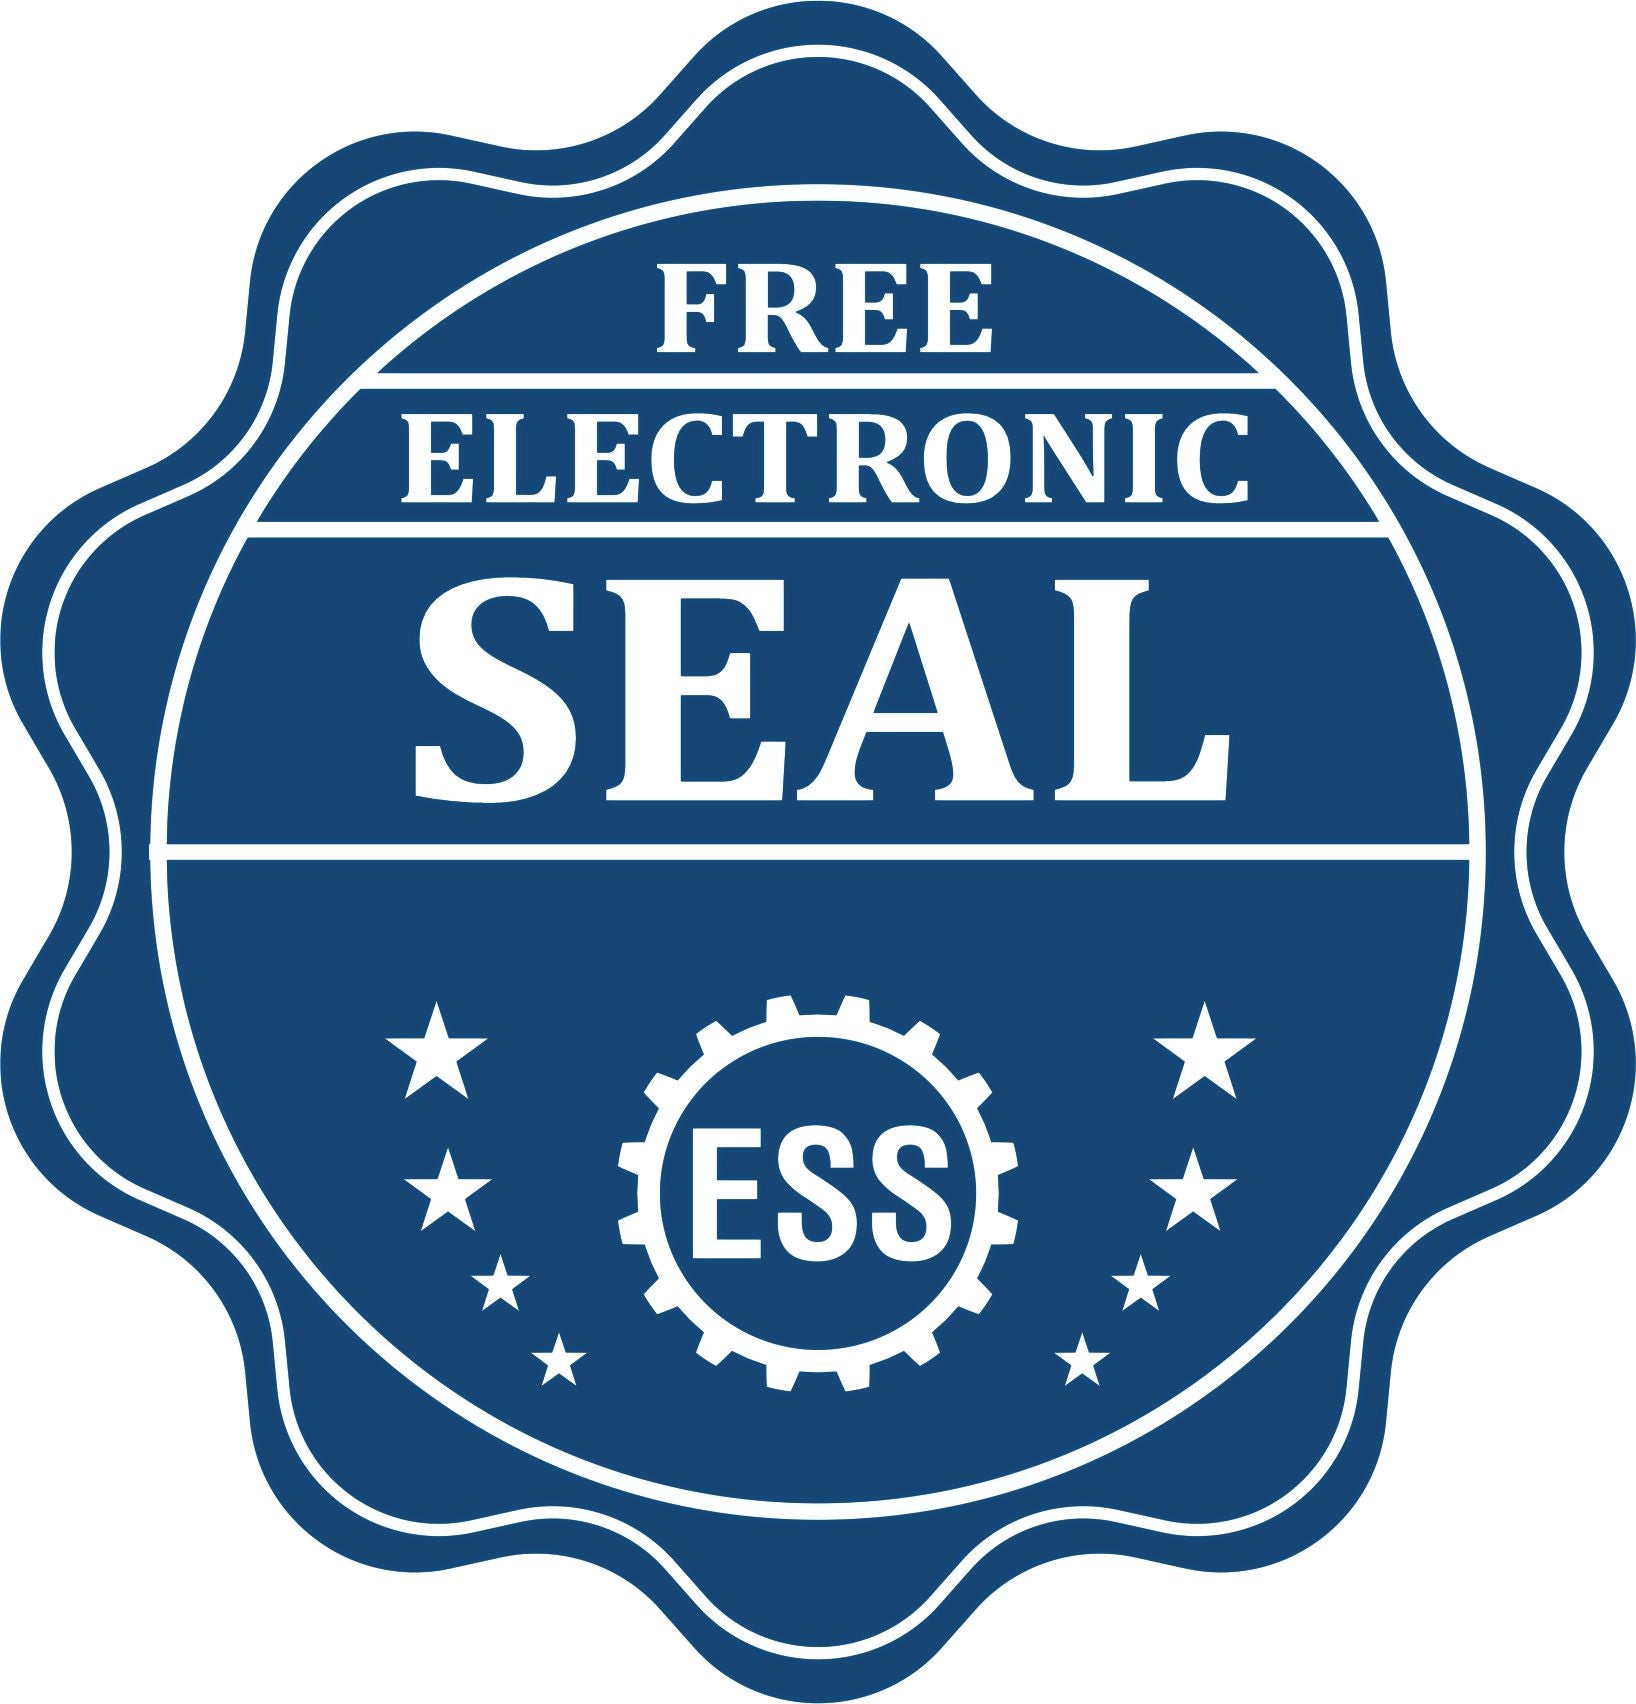 A badge showing a free electronic seal for the Hybrid Connecticut Engineer Seal with stars and the ESS gear on the emblem.